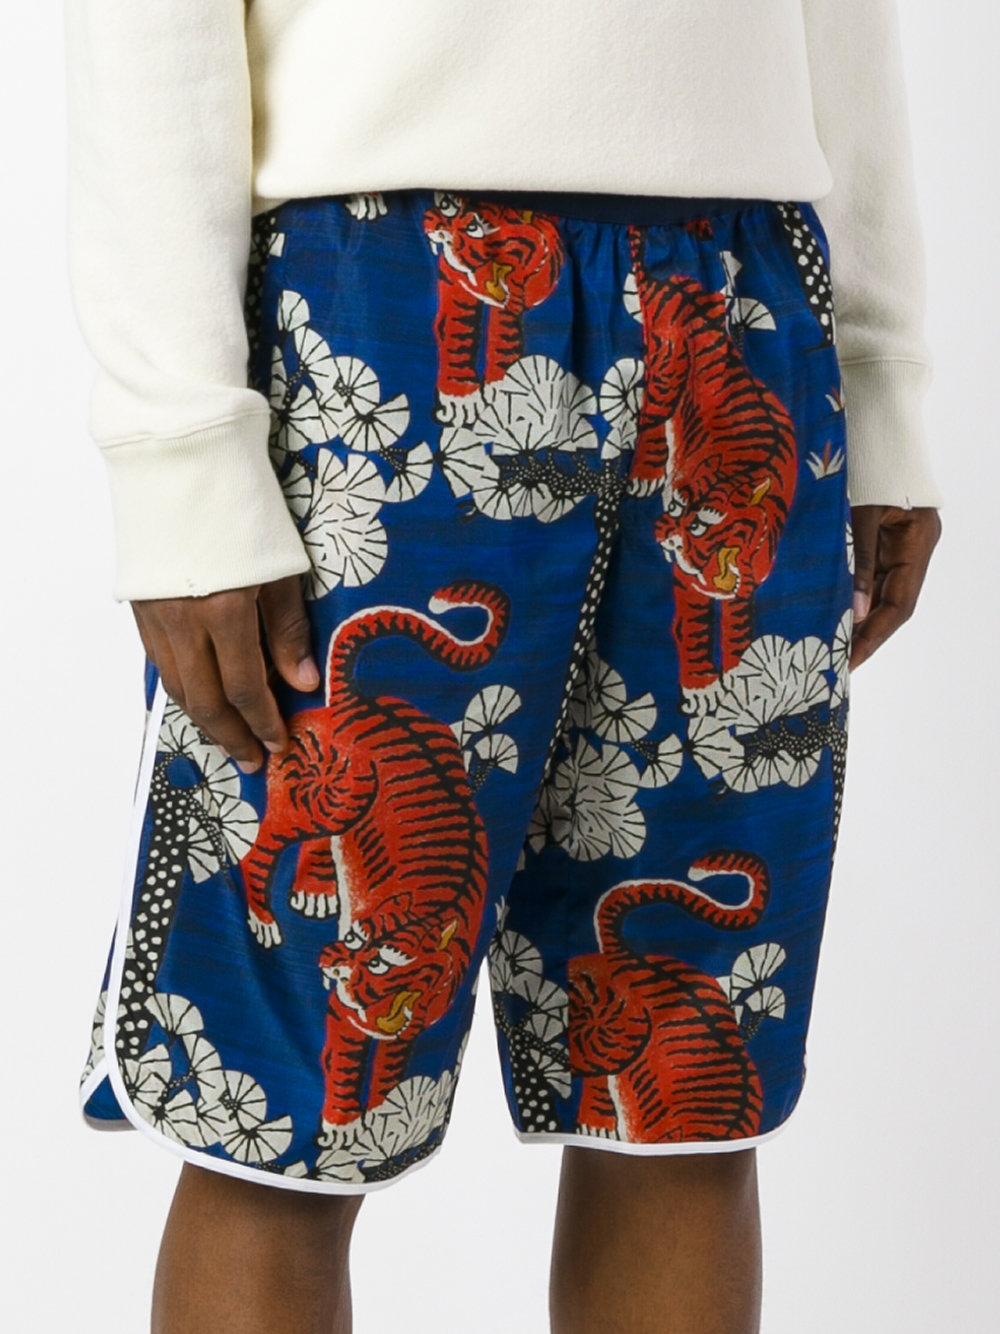 Gucci Bengal Print Swim Shorts in Blue for Men - Lyst